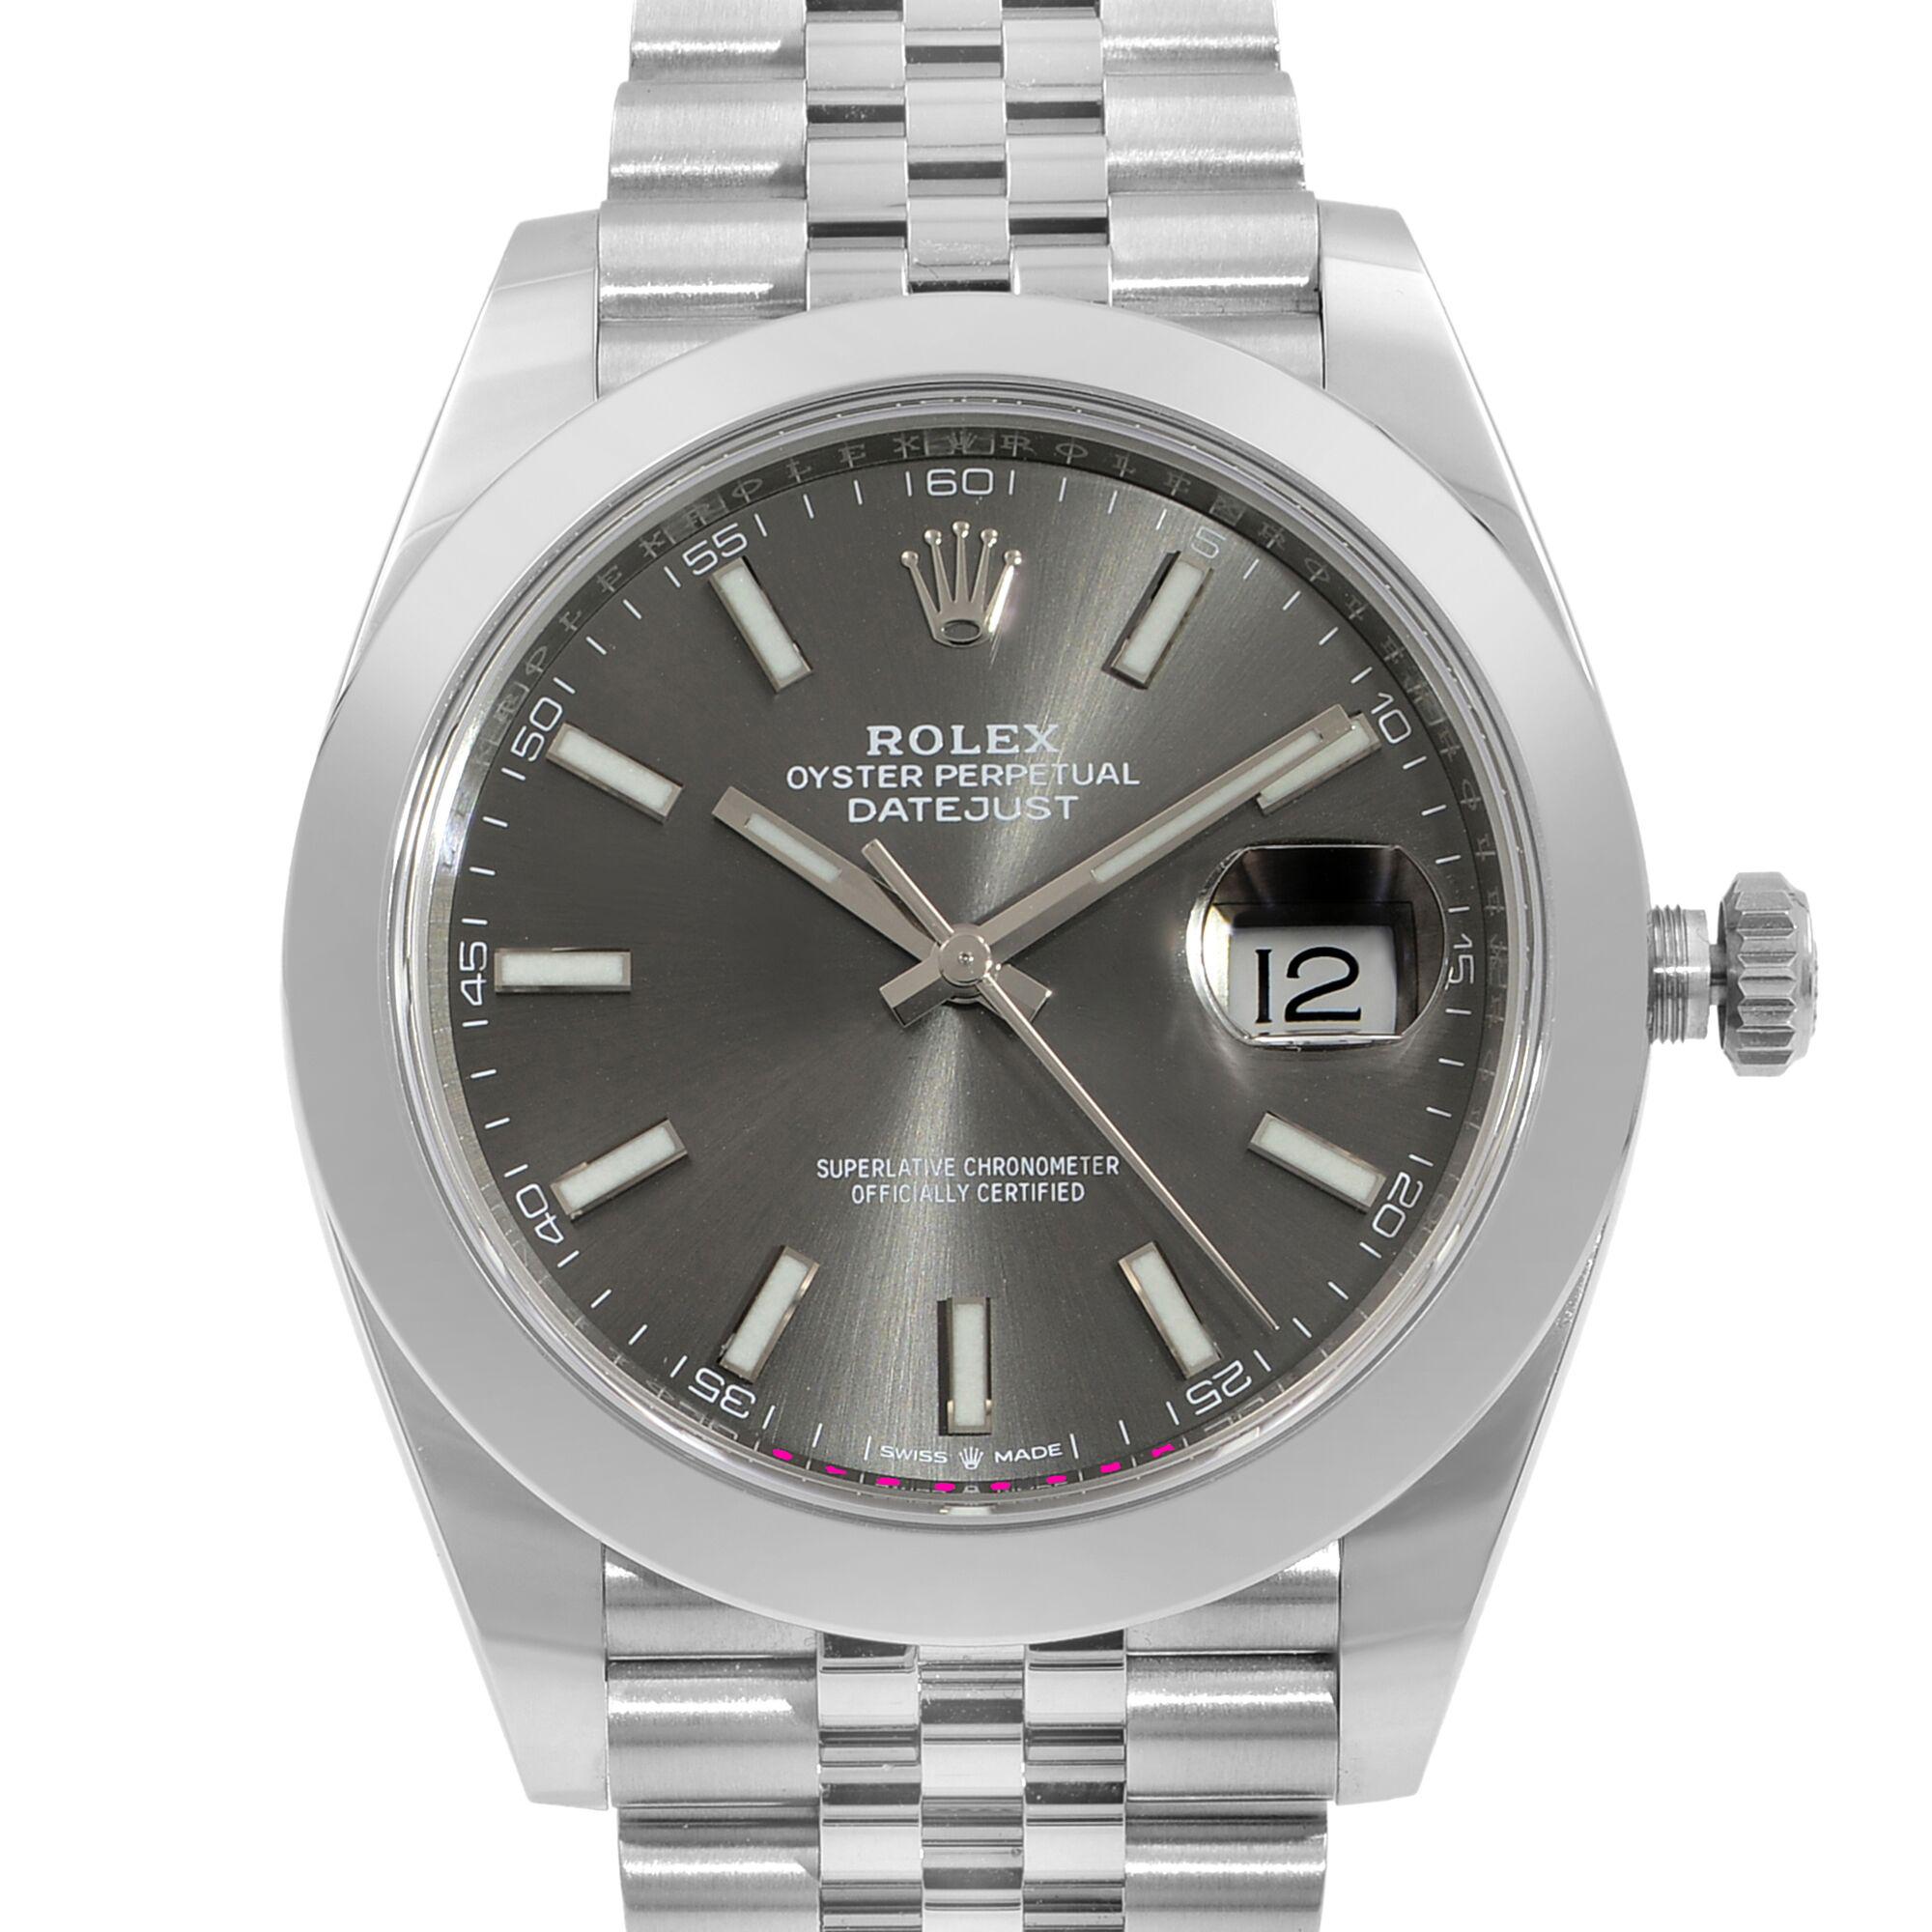 This Unworn Rolex Datejust 41 126300-RHOSJ is a beautiful men's timepiece that is powered by mechanical (automatic) movement which is cased in a stainless steel case. It has a round shape face, date indicator dial and has hand sticks style markers.